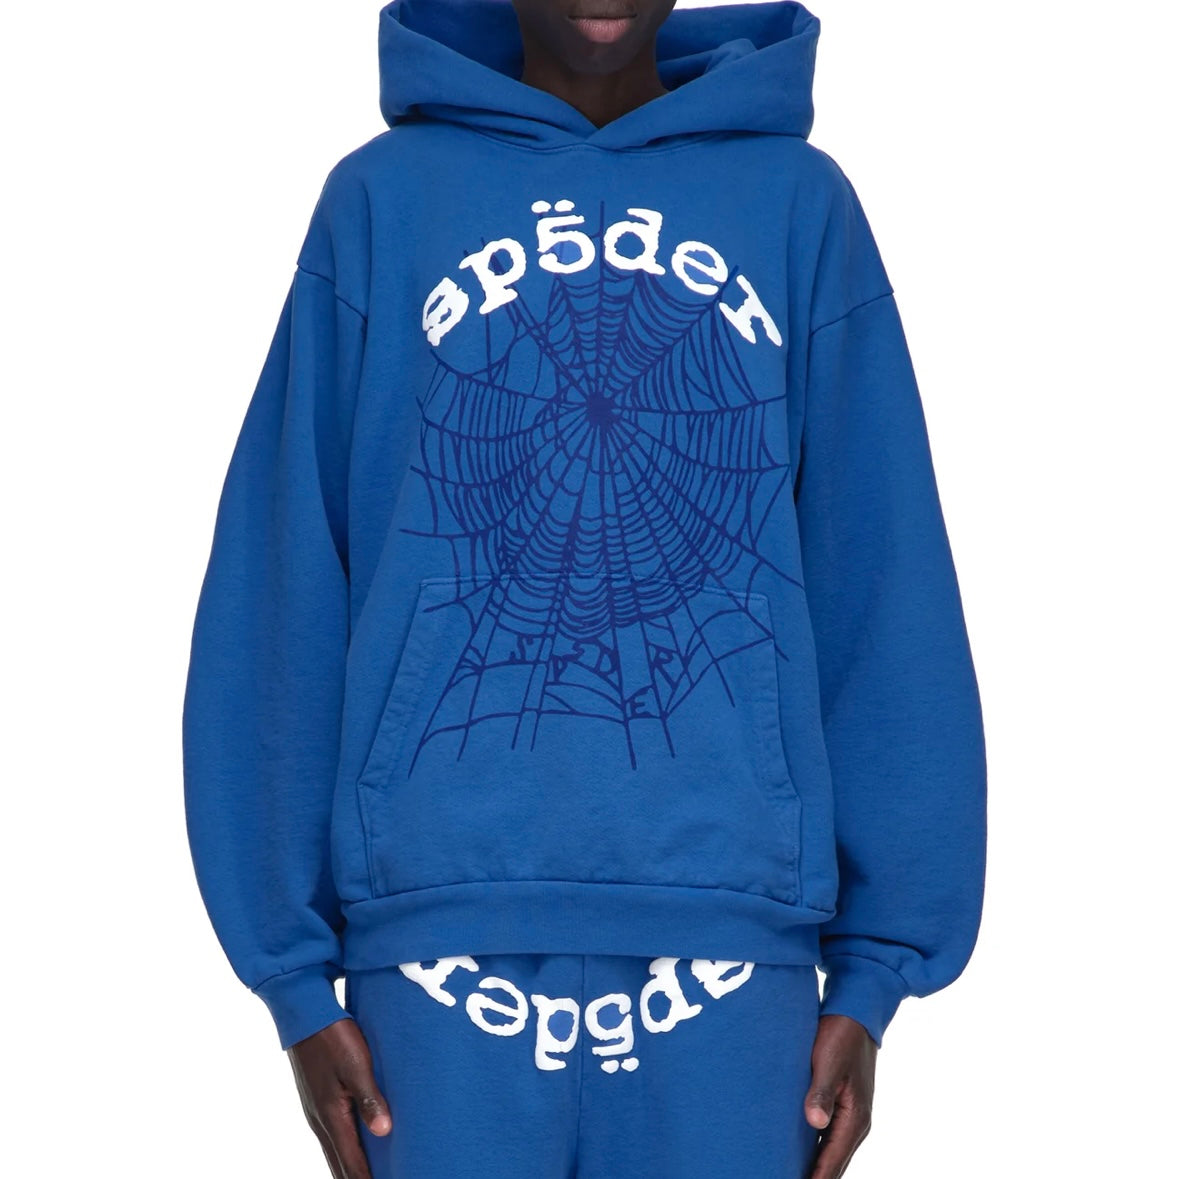 Sp5der Blue White Legacy Hoodie On Body Front Male